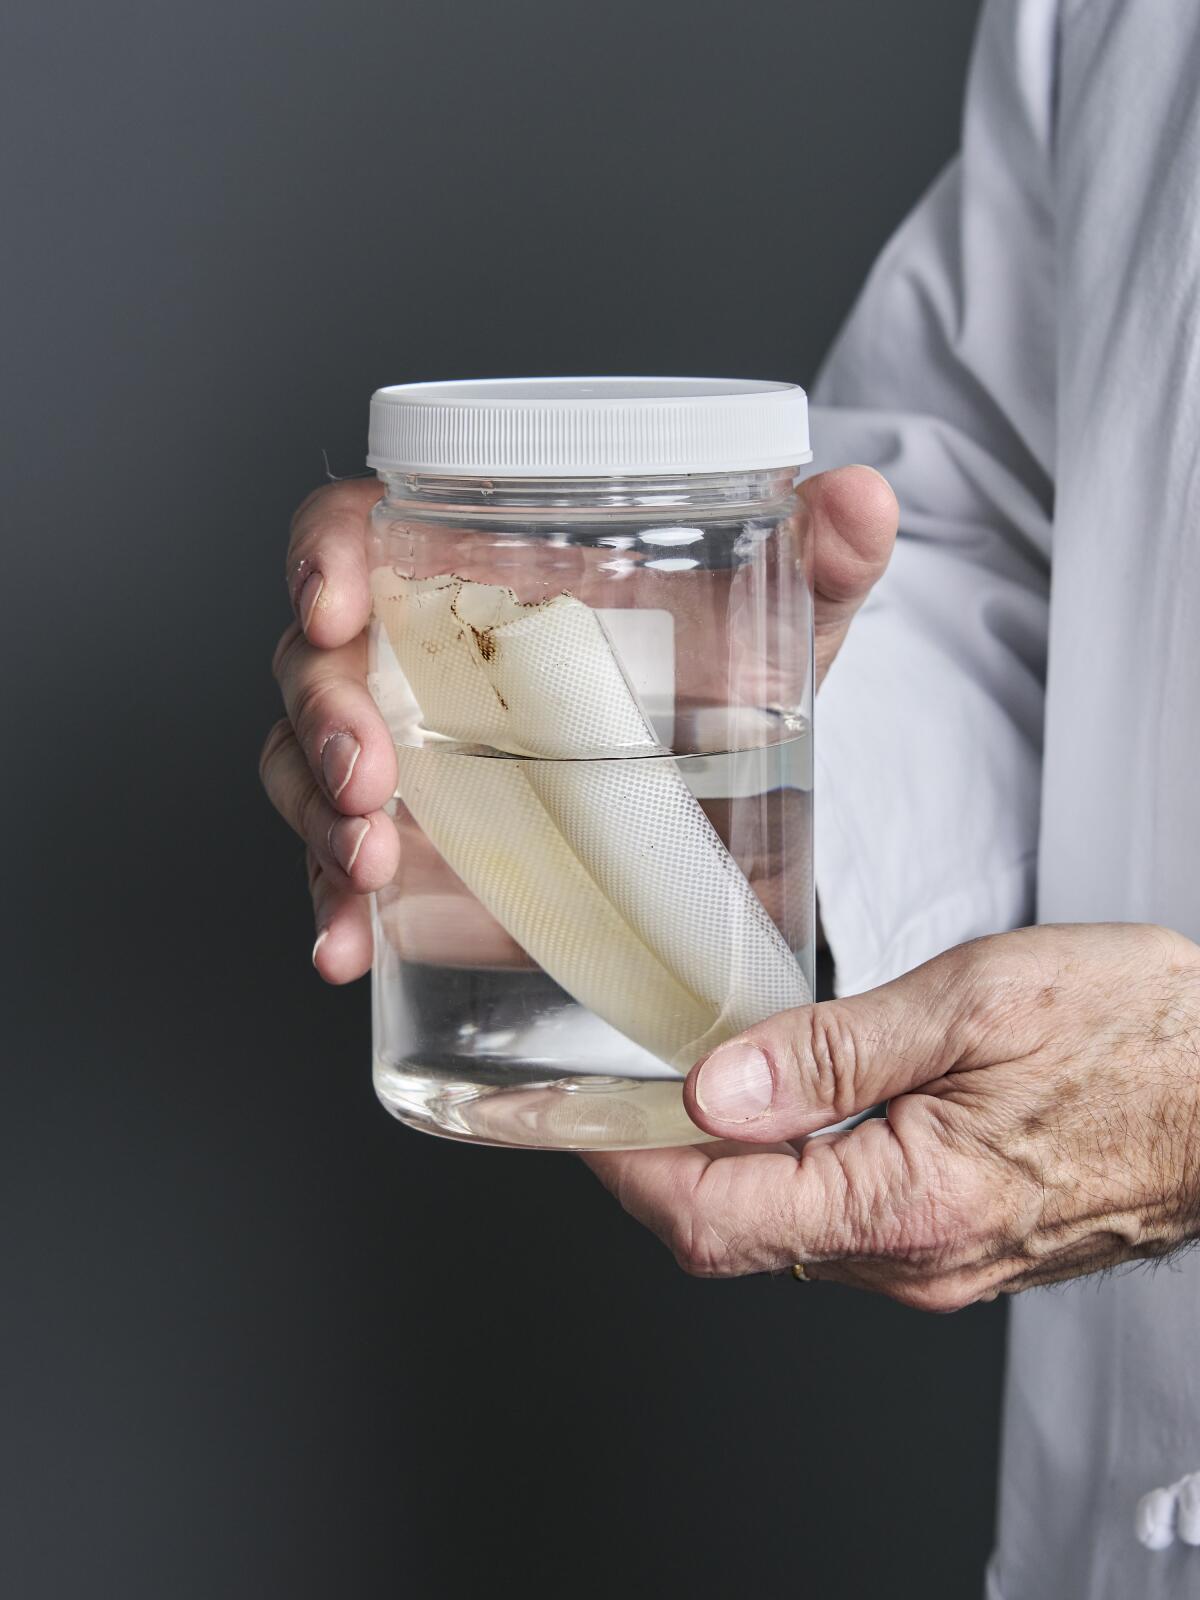 A Penuma implant, which was removed from the patient, appeared in the jar.